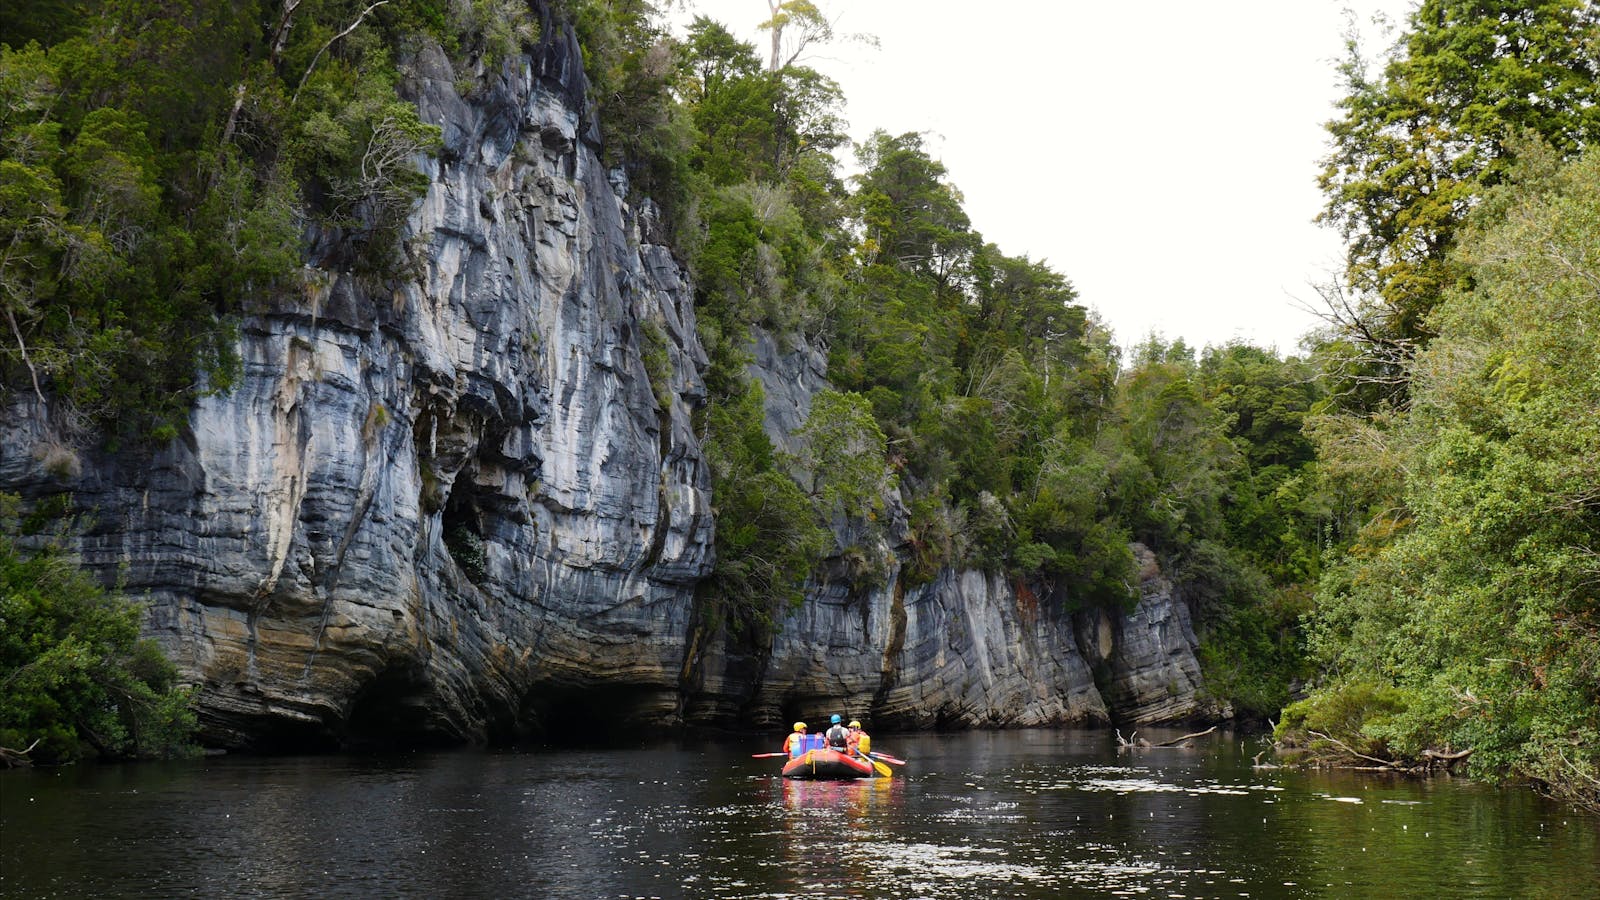 Limestone cliffs along the lower reaches of the Franklin River